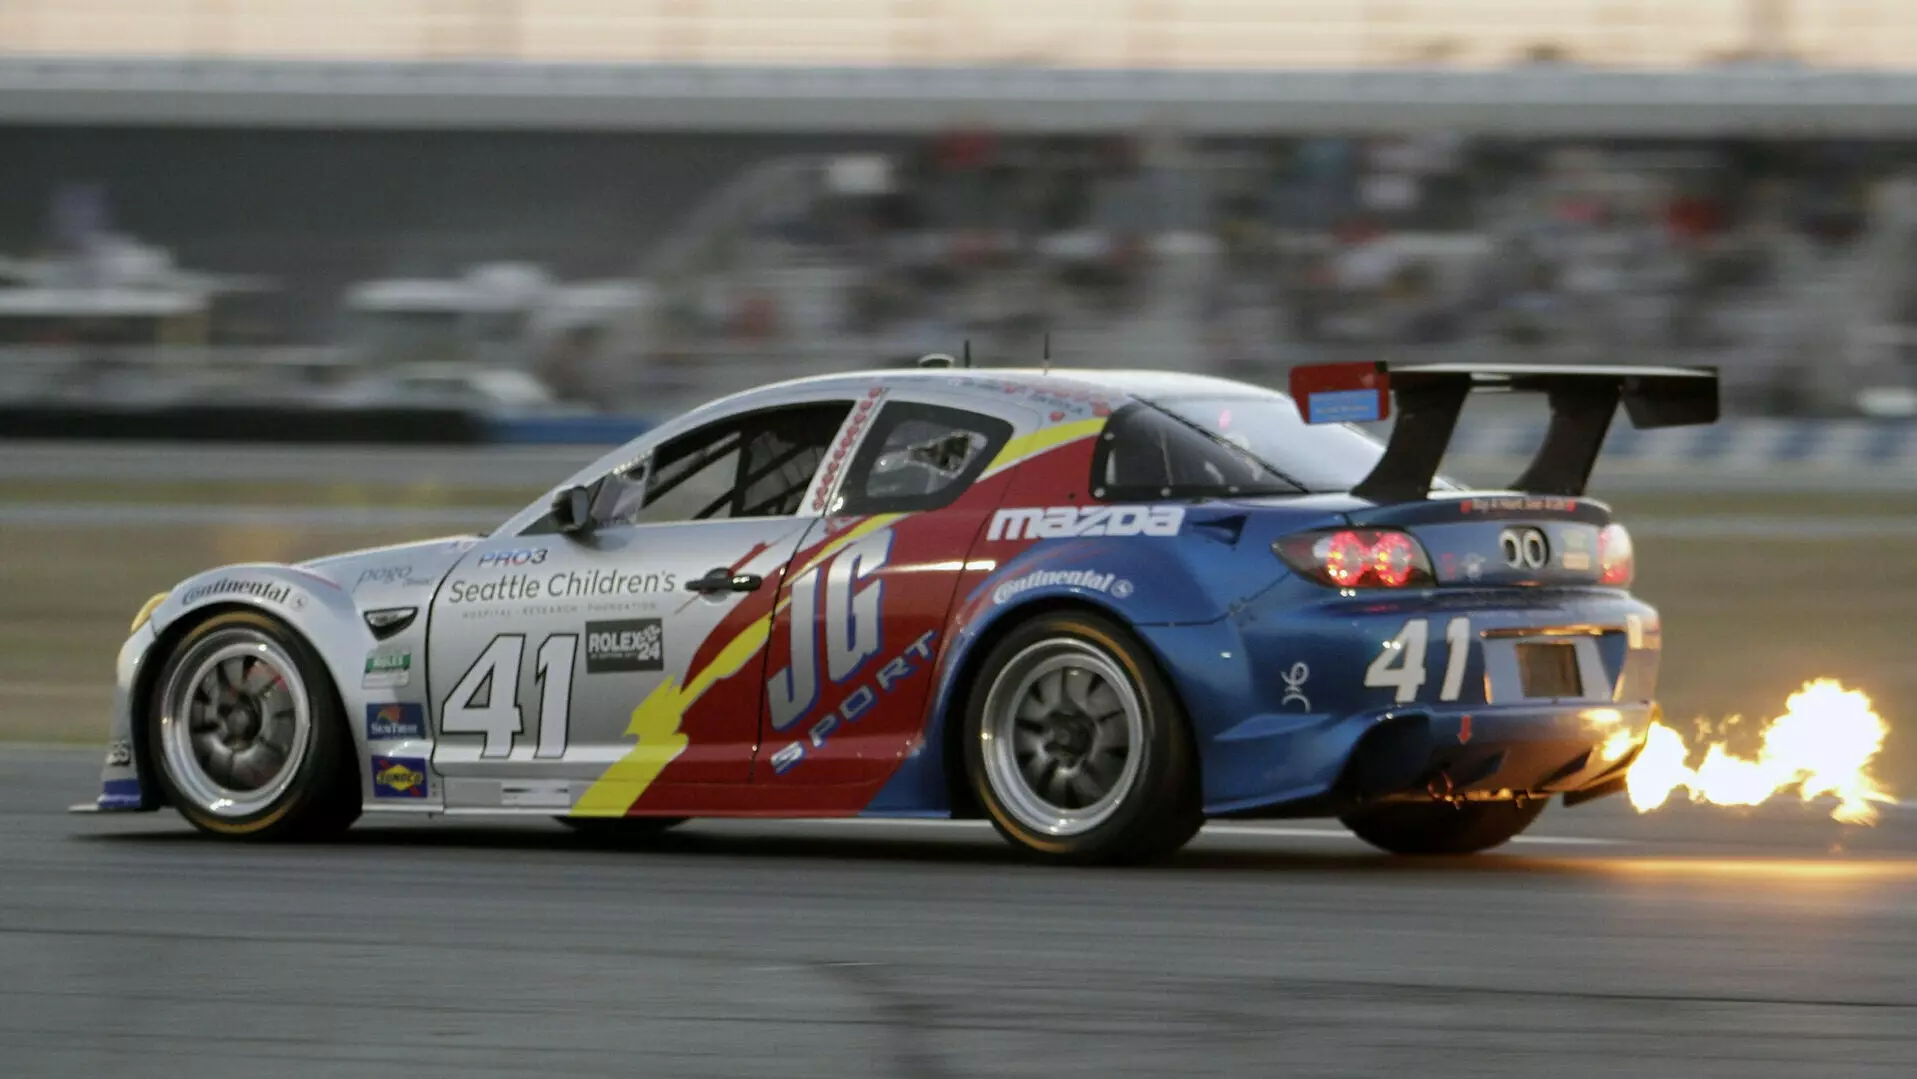 The Glorious Roar of a Three-Rotor RX-8 Stirs the Soul